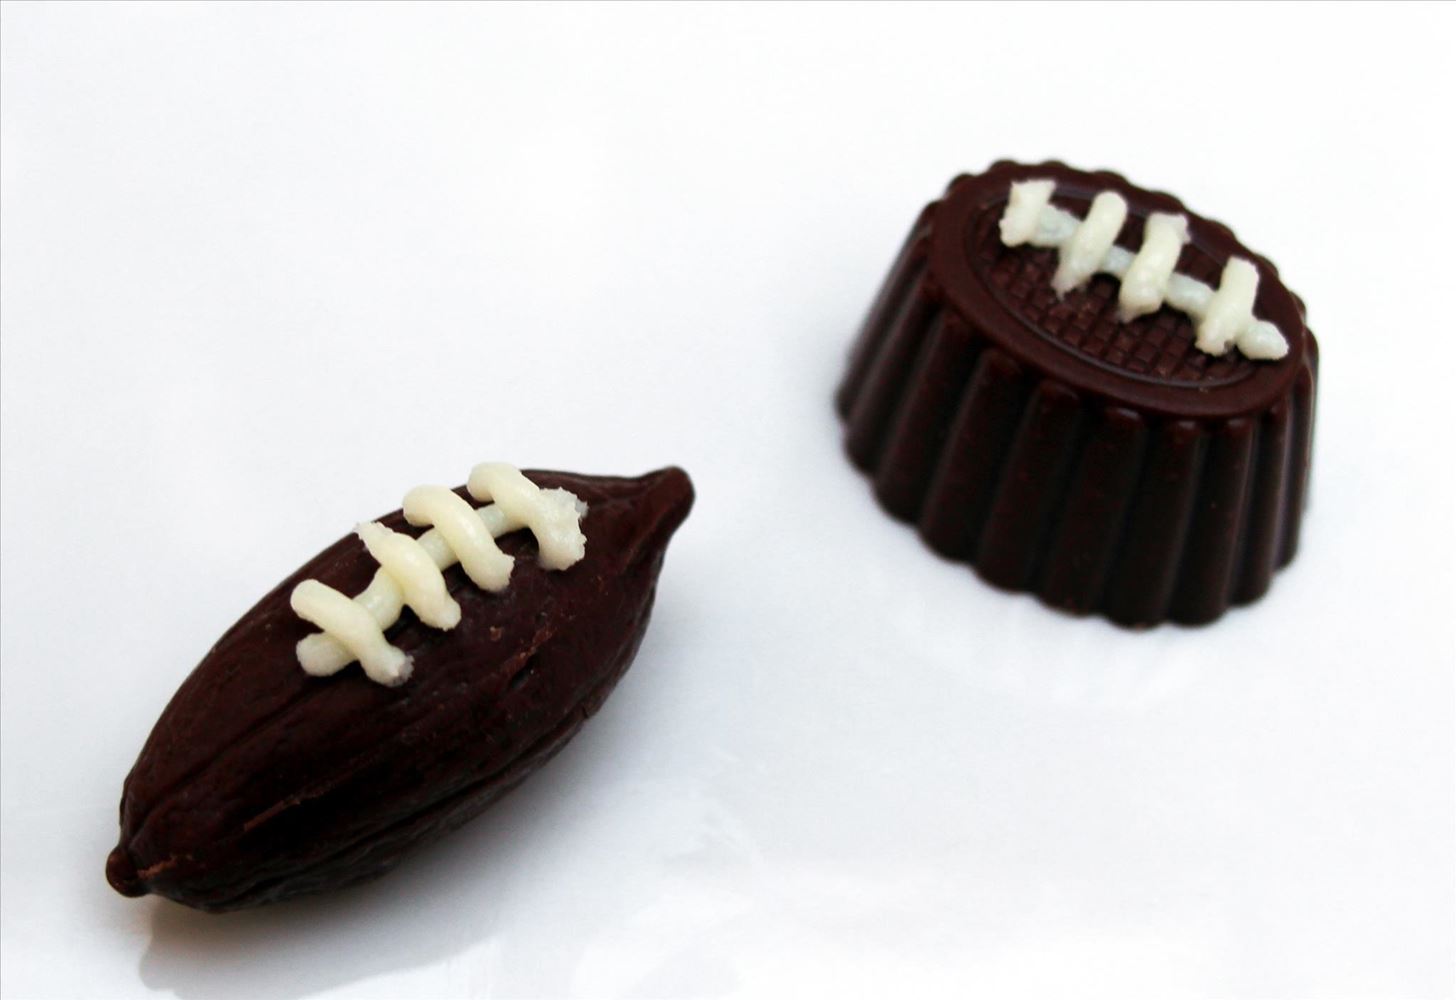 5-Minute Super Bowl Snacks for the Win